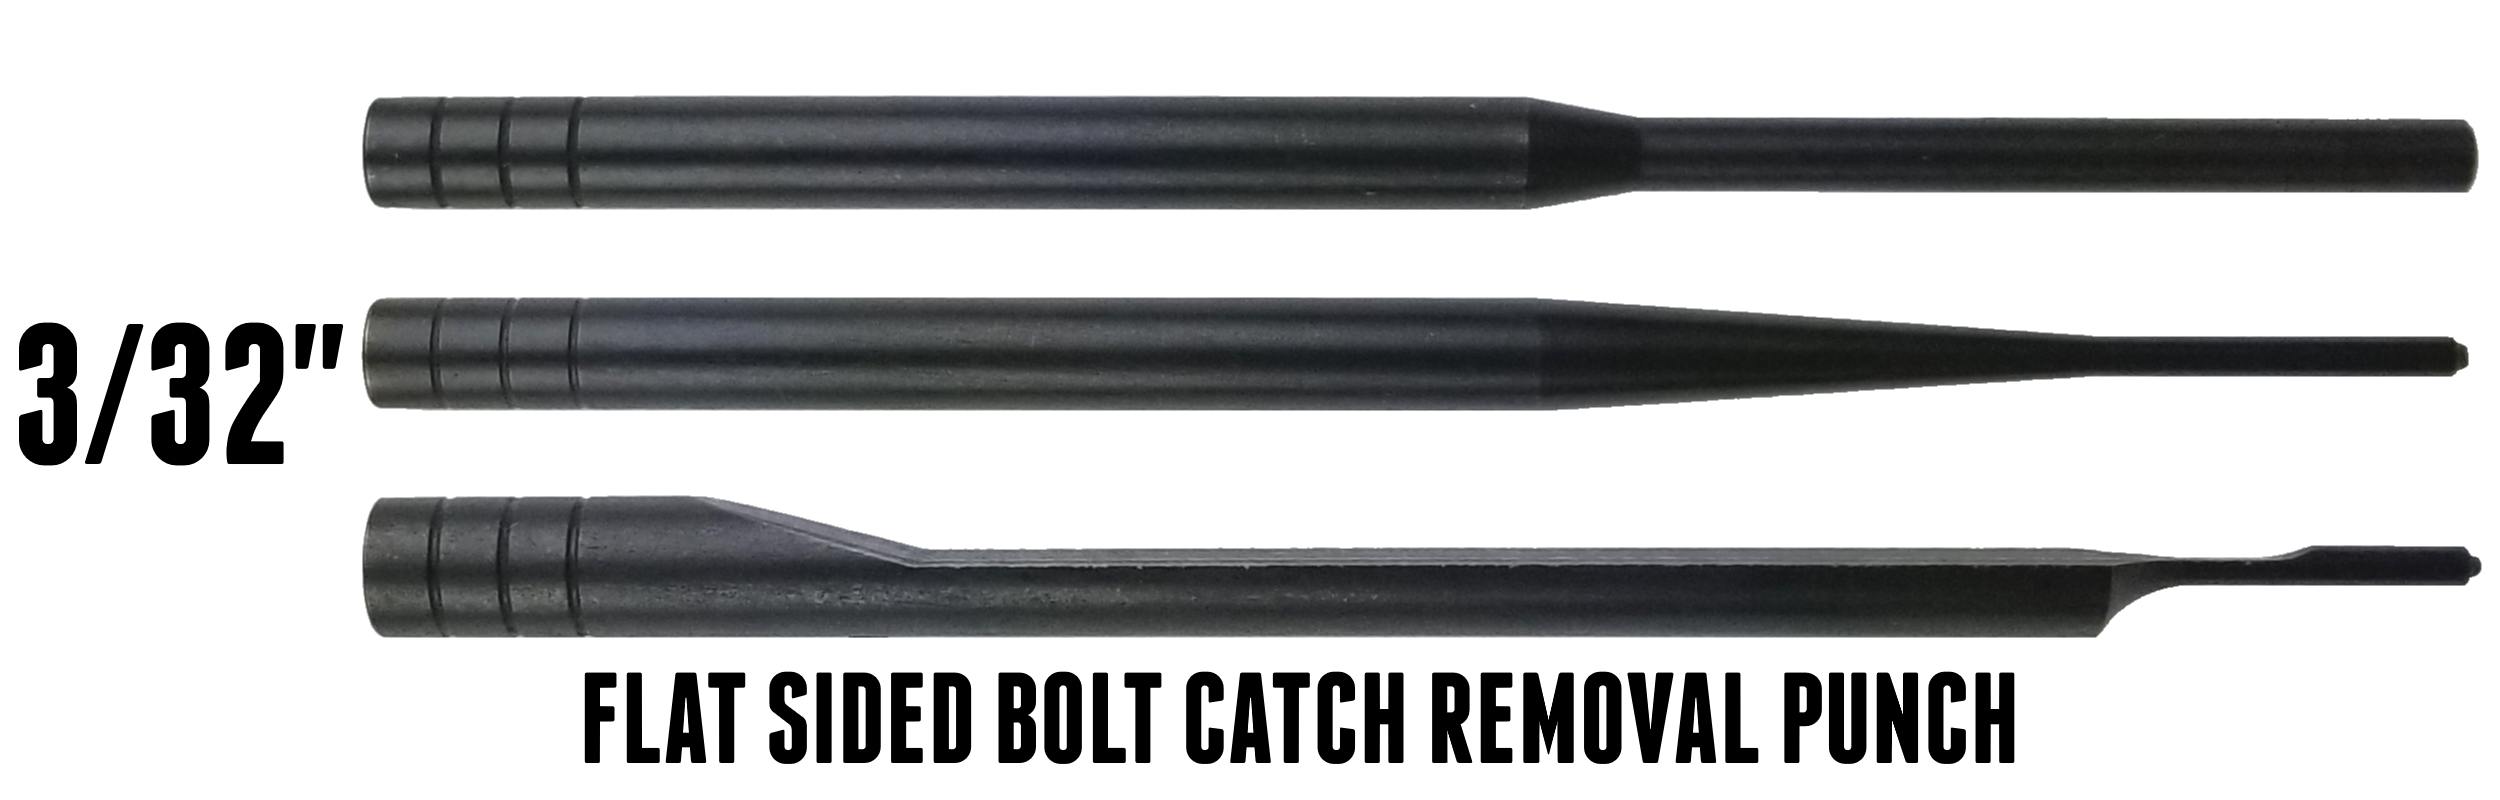 BOLT CATCH RELEASE PUNCH PIN SET ROLL PIN STARTER & PUNCH FLAT ONE SIDE 3/32 